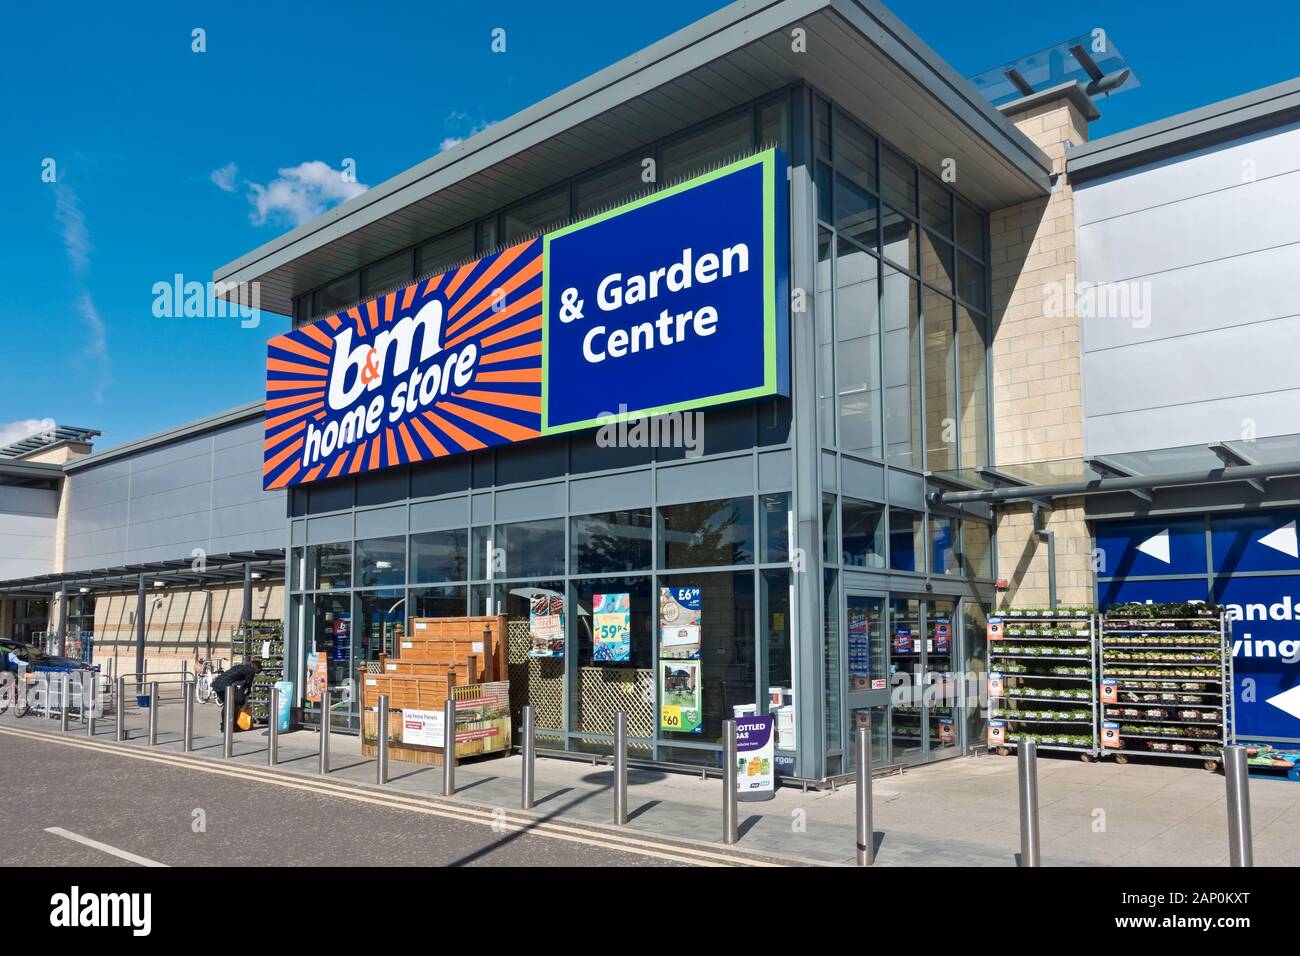 BM Home Convenience Store and Garden Centre Shop at the Foss Islands Retail Park. Stock Photo